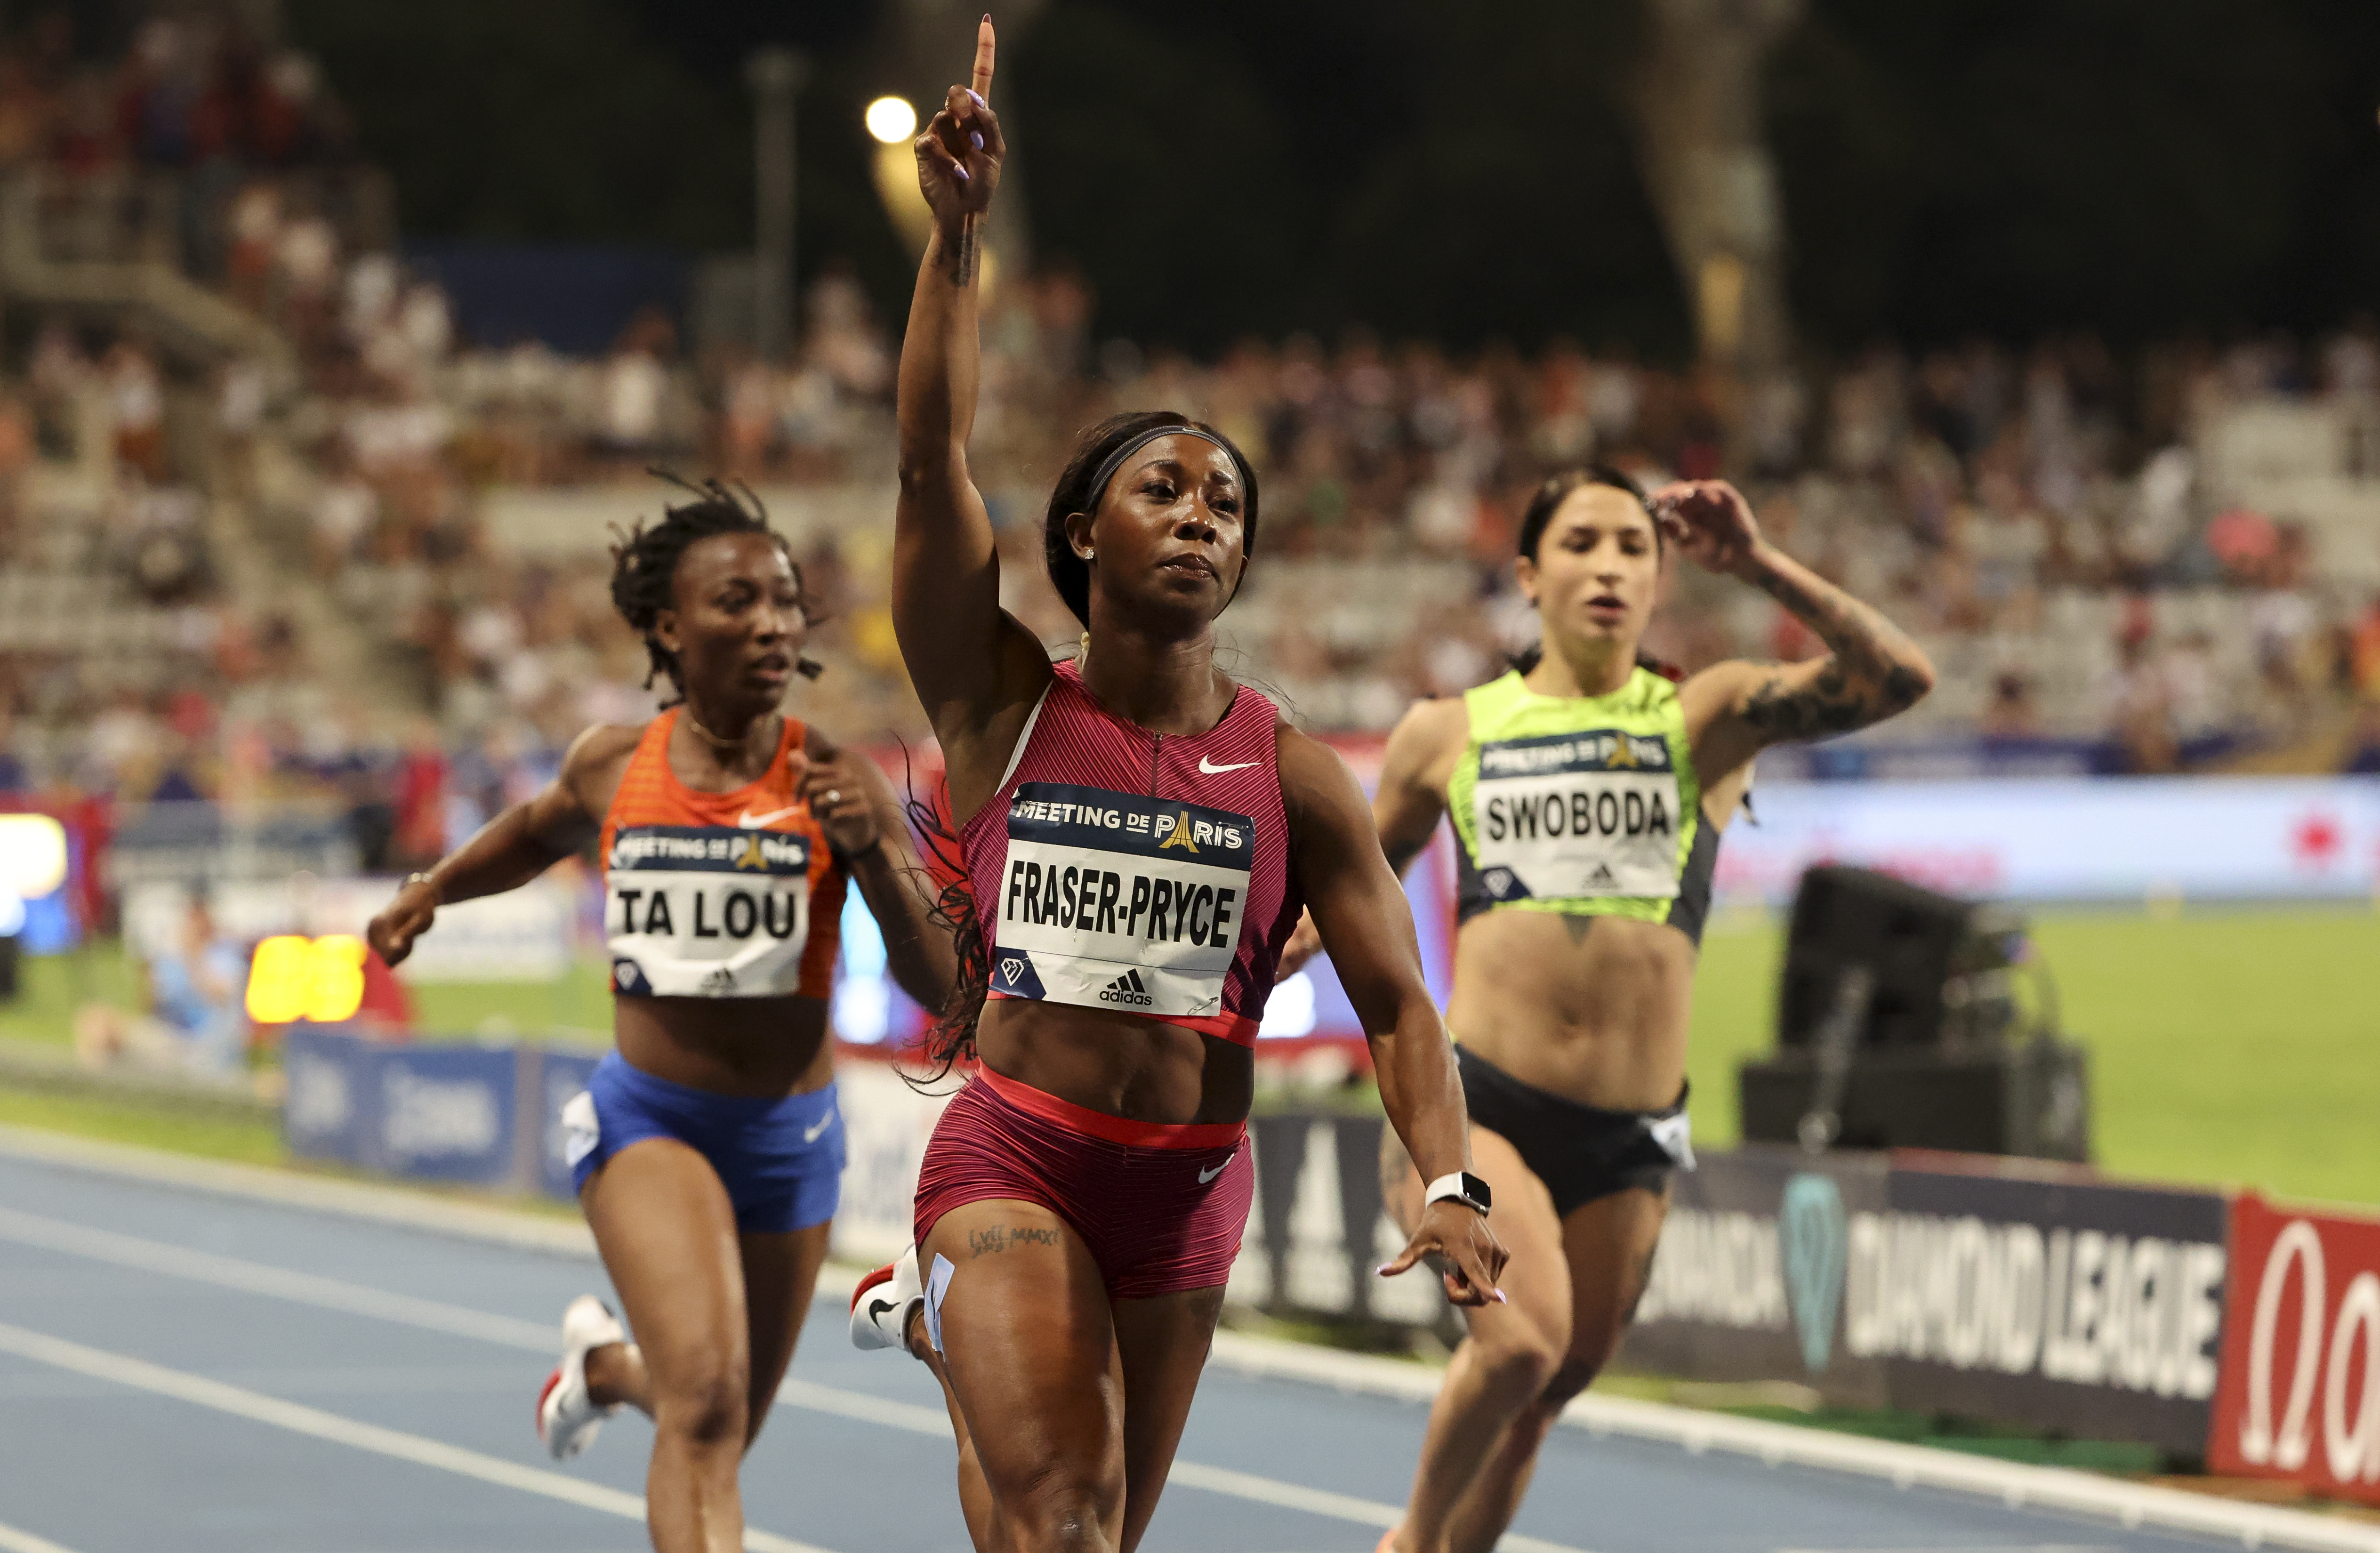 Shelly-Ann Fraser-Pryce of Jamaica celebrates winning the 100m. left Marie-Josee Ta Lou of Ivory Coast, Ewa Swoboda of Poland during the Meeting de Paris 2022, part of the Wanda Diamond League series at Stade Charlety on June 18, 2022 in Paris, France.